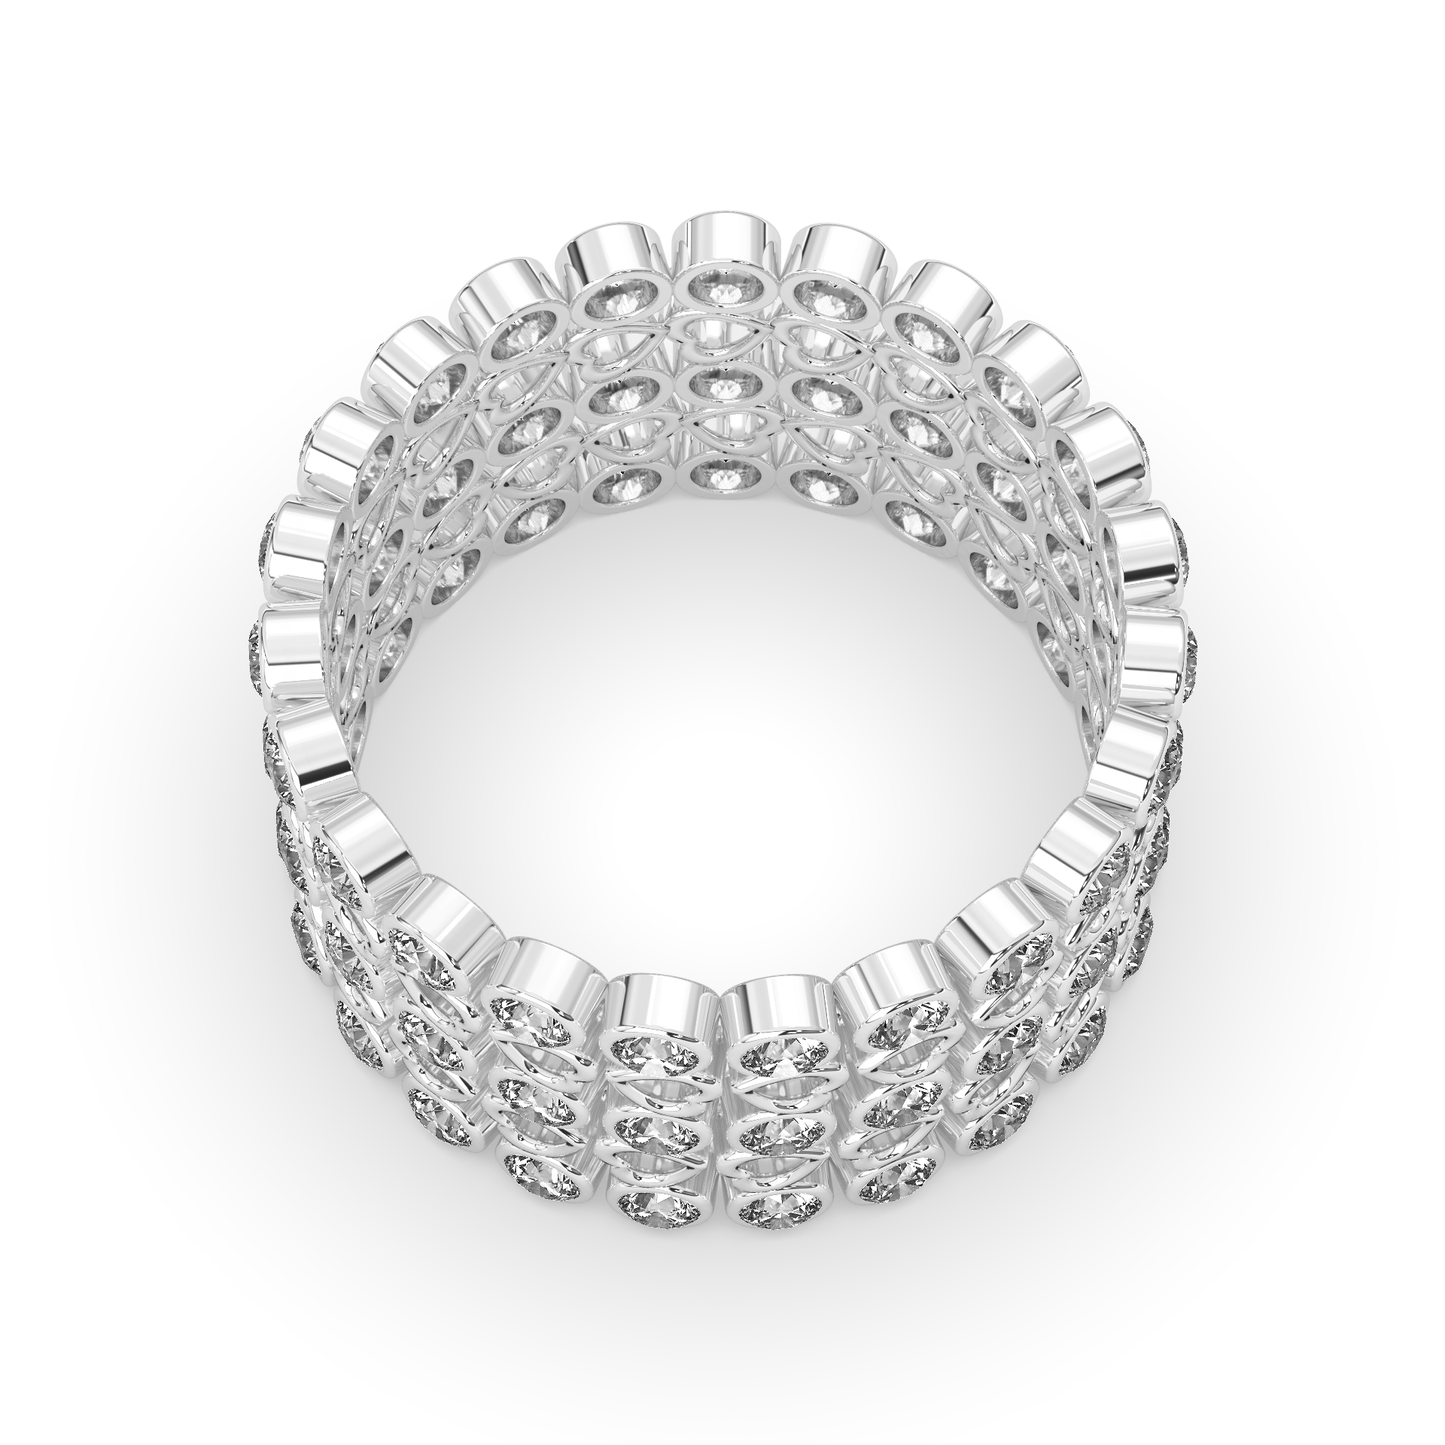 925 Silver 2 In 1 Ring  + Bracelet {Free Size - Convertible}